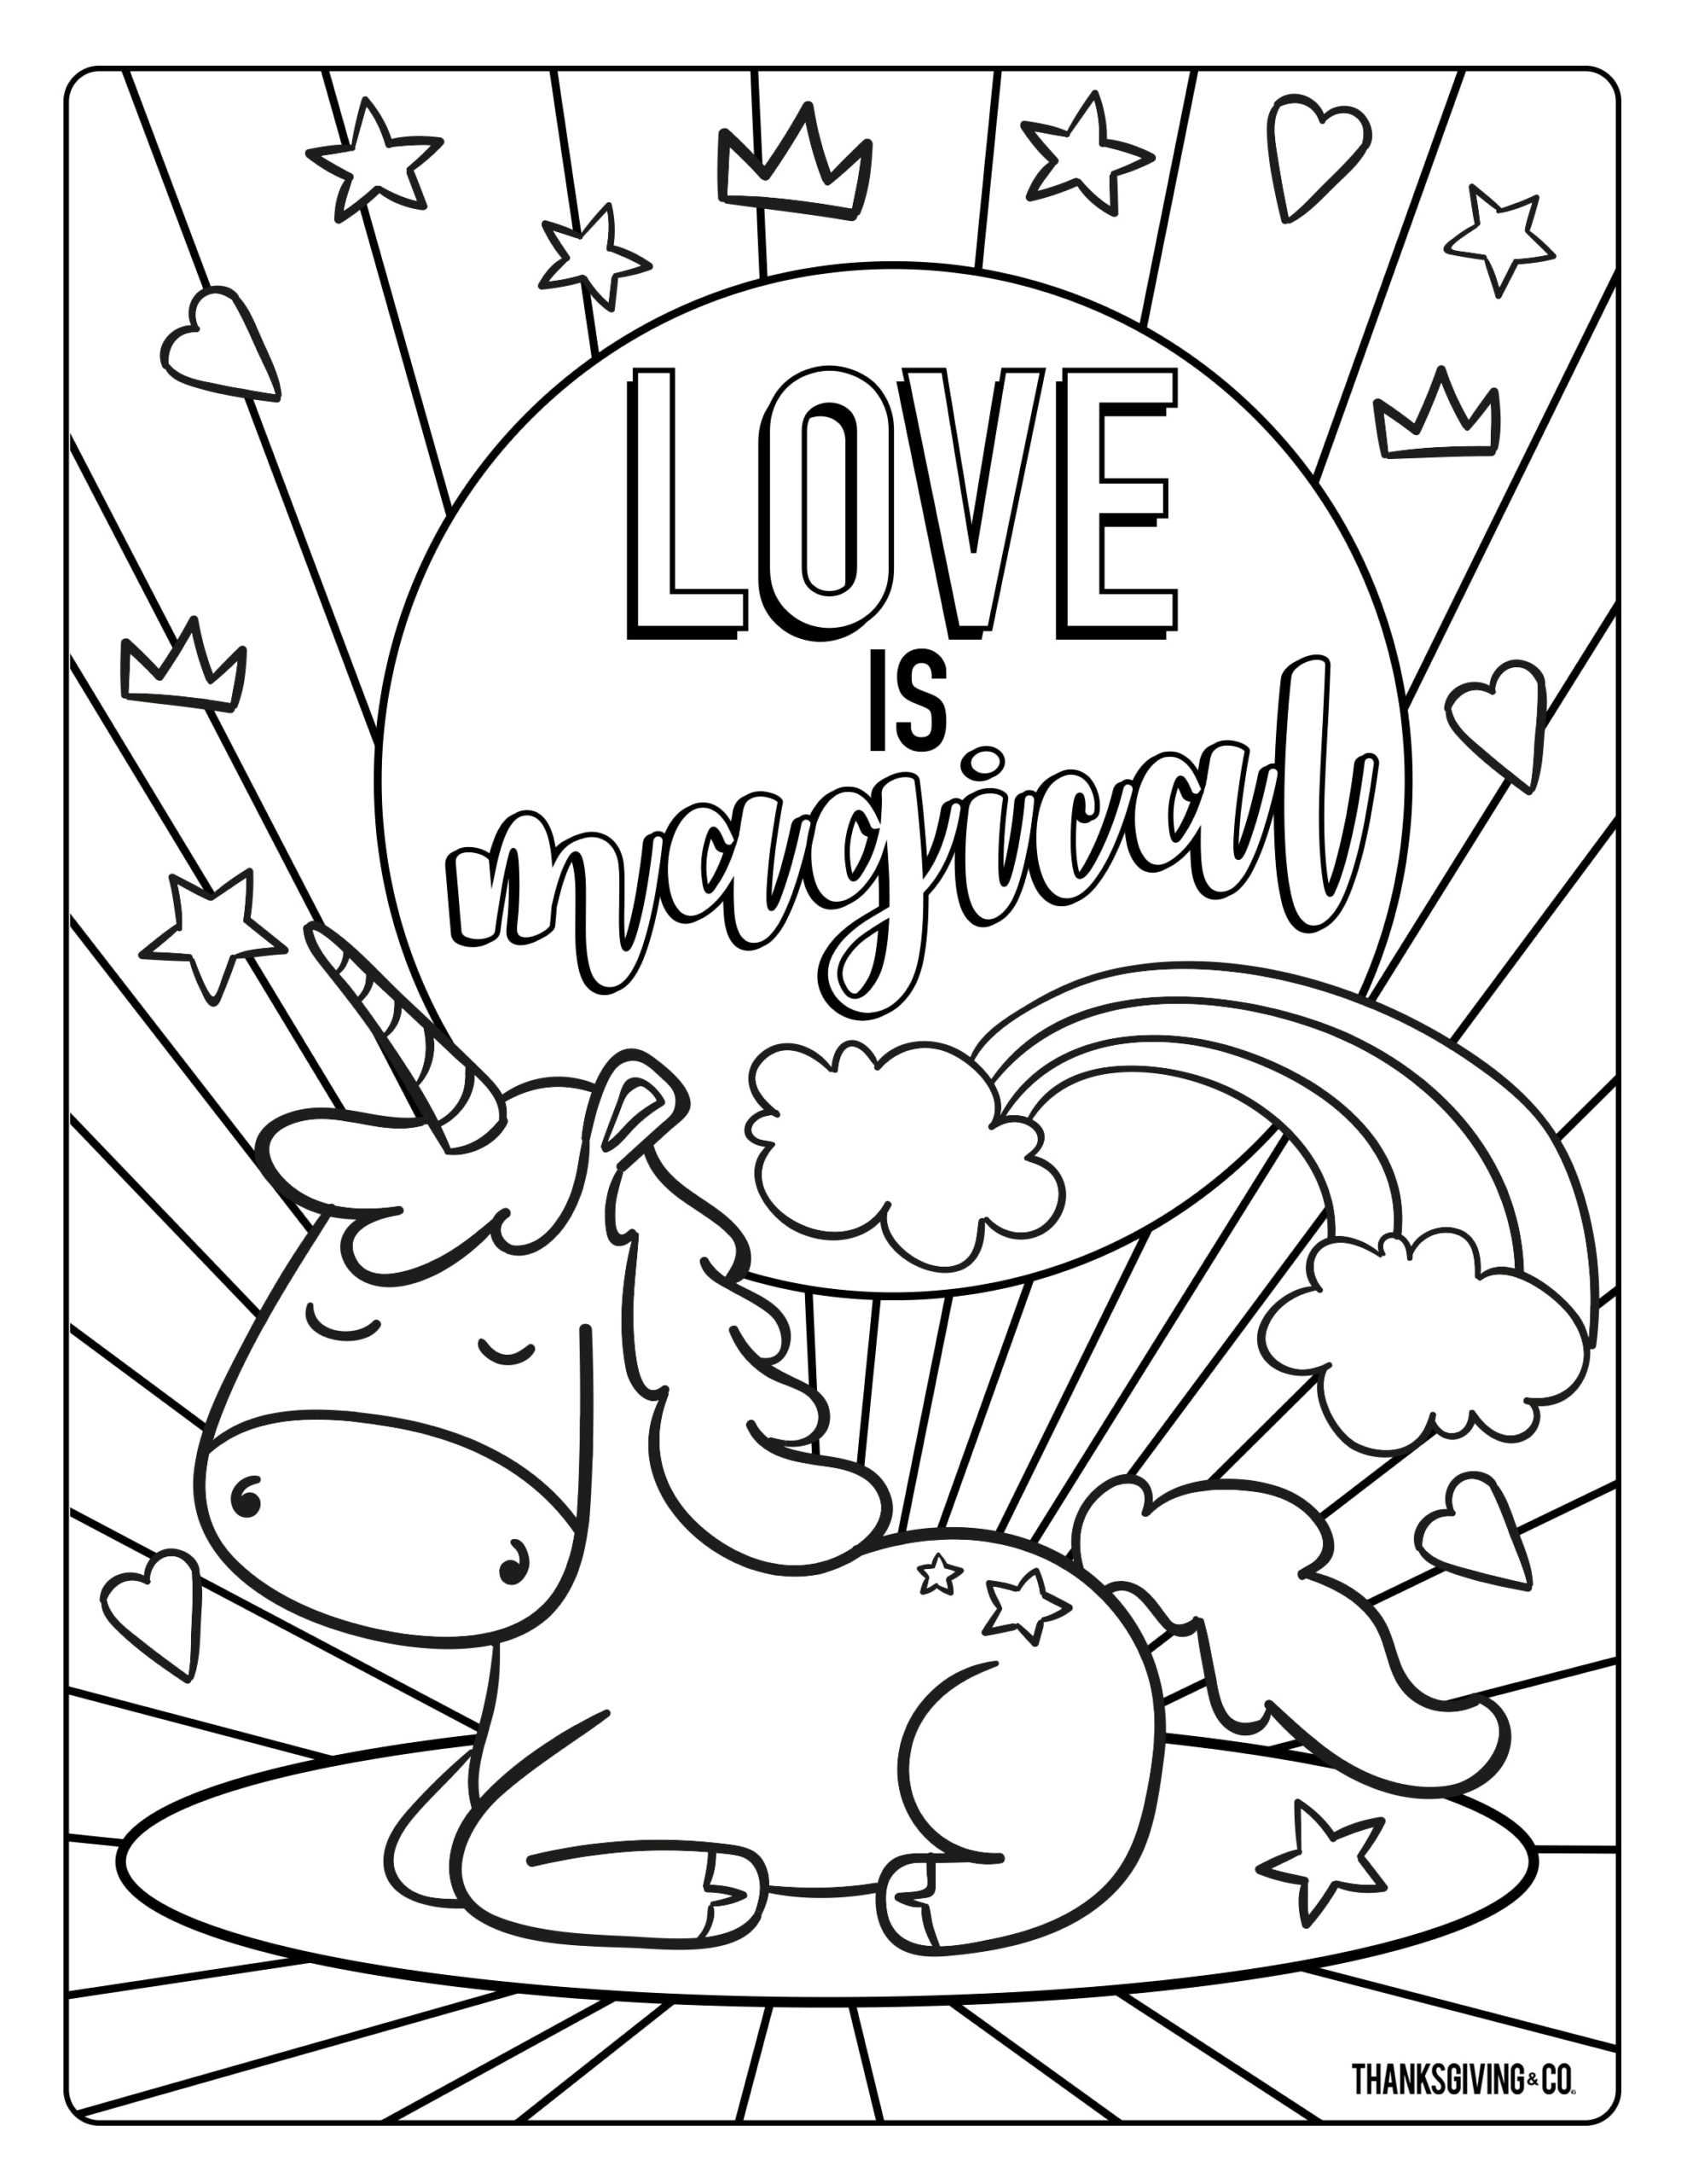 Valentine&39;s Day 2020 Coloring Pages   Coloring Home